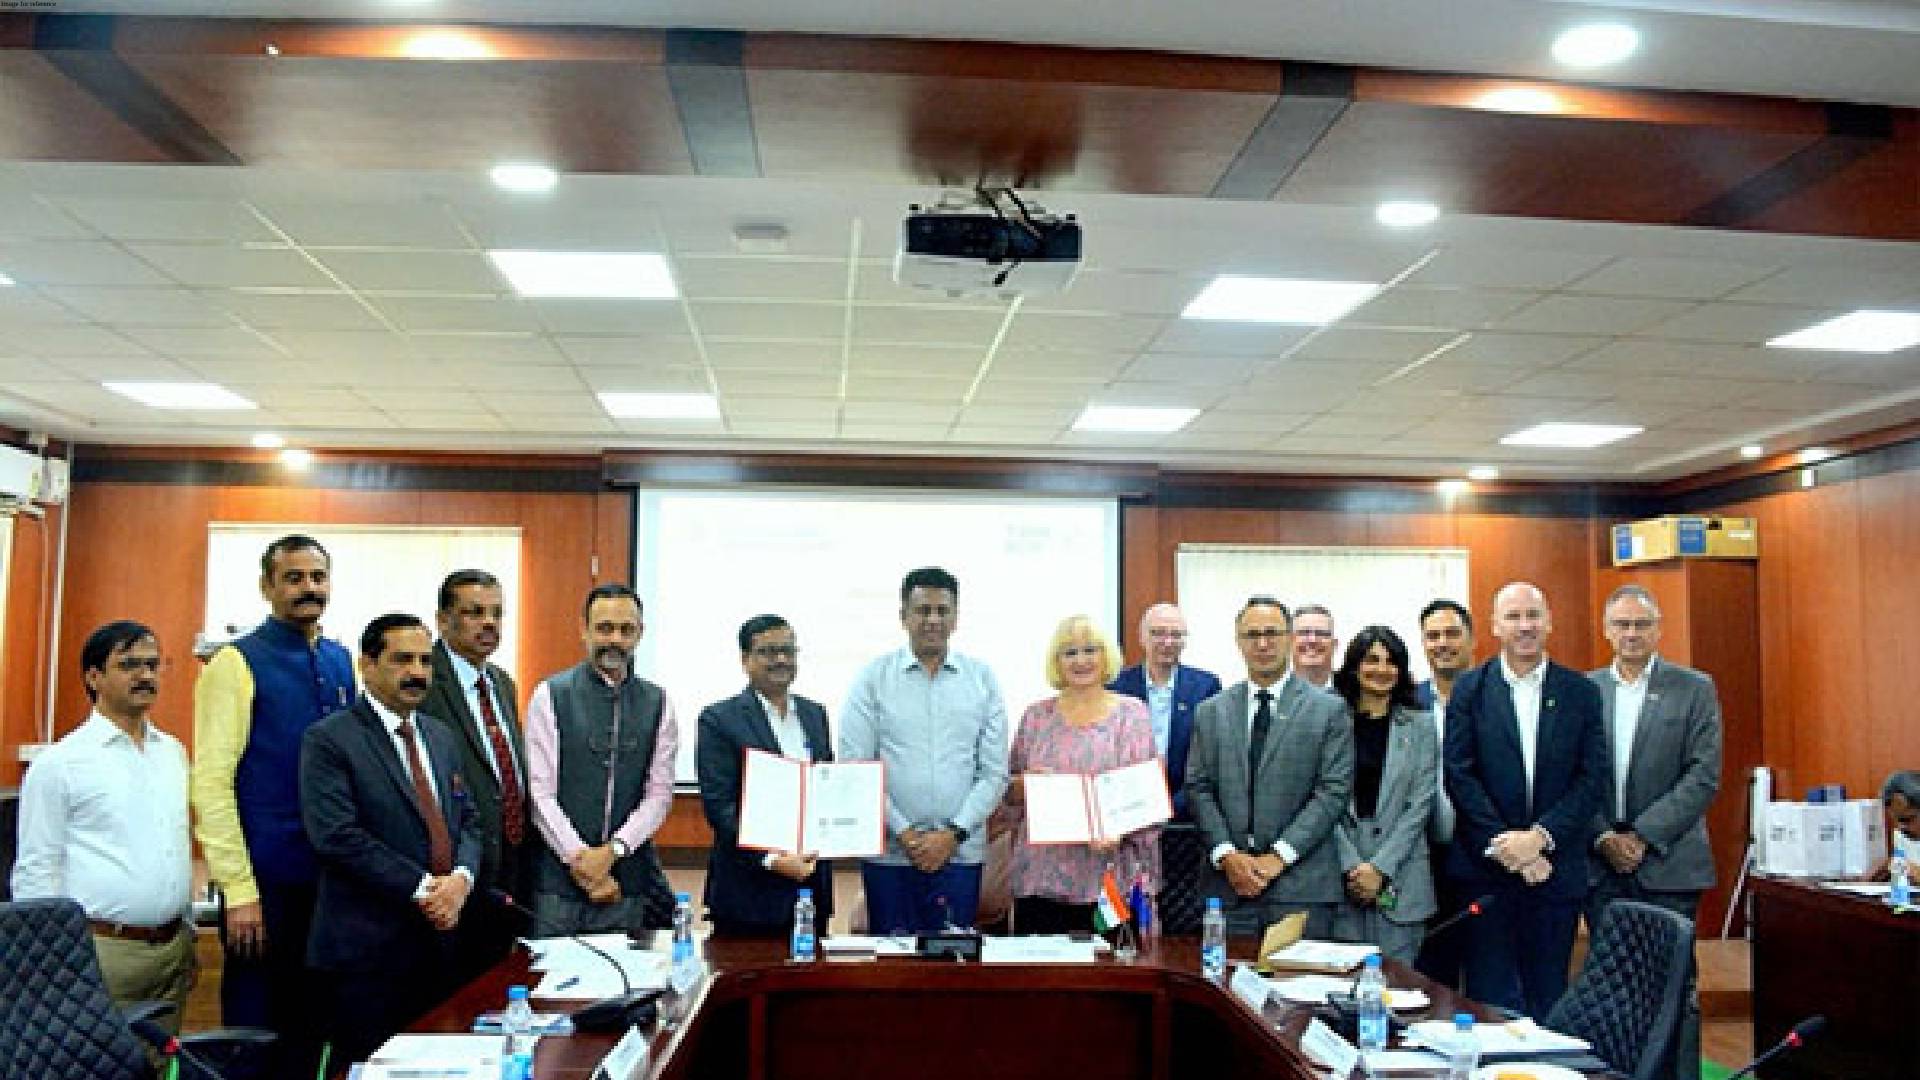 Karnataka, New Zealand govt agency sign MoU to promote cultural exchange, educational opportunities